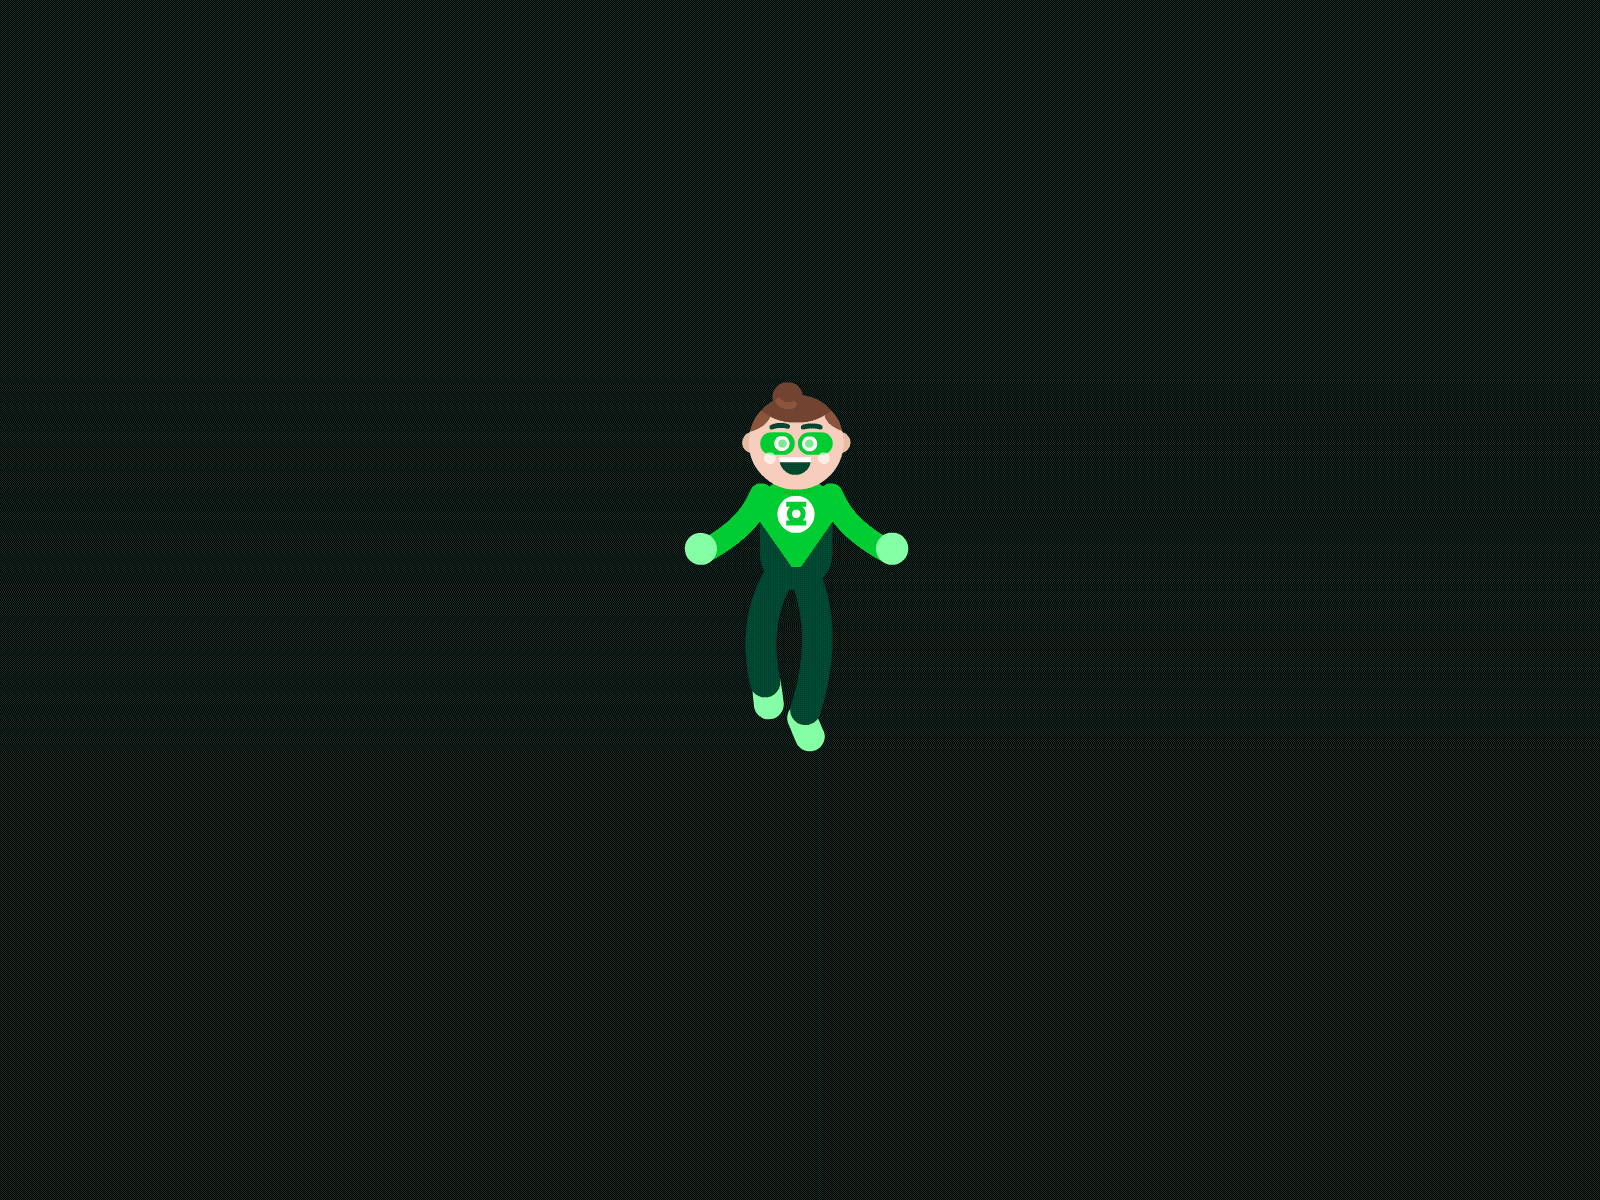 Heroes Indoors - Green Lantern #StayHome aftereffects animation character animation characterdesign covid19 digital illustration loop animation stayhome staysafe superhero